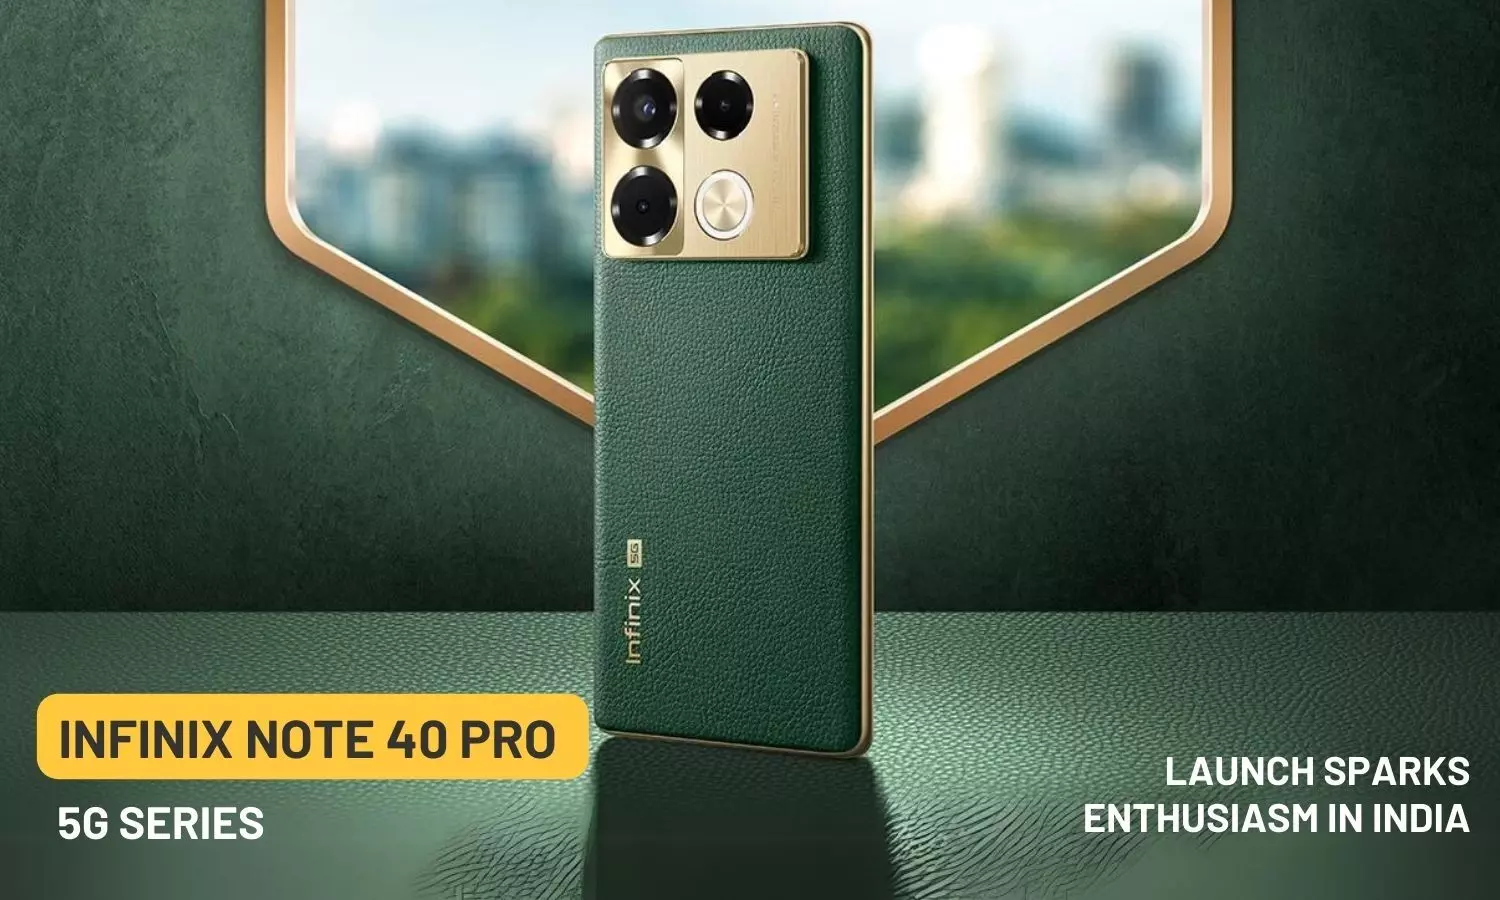 Infinix Note 40 Pro 5G Series: Anticipated Launch Sparks Enthusiasm in India